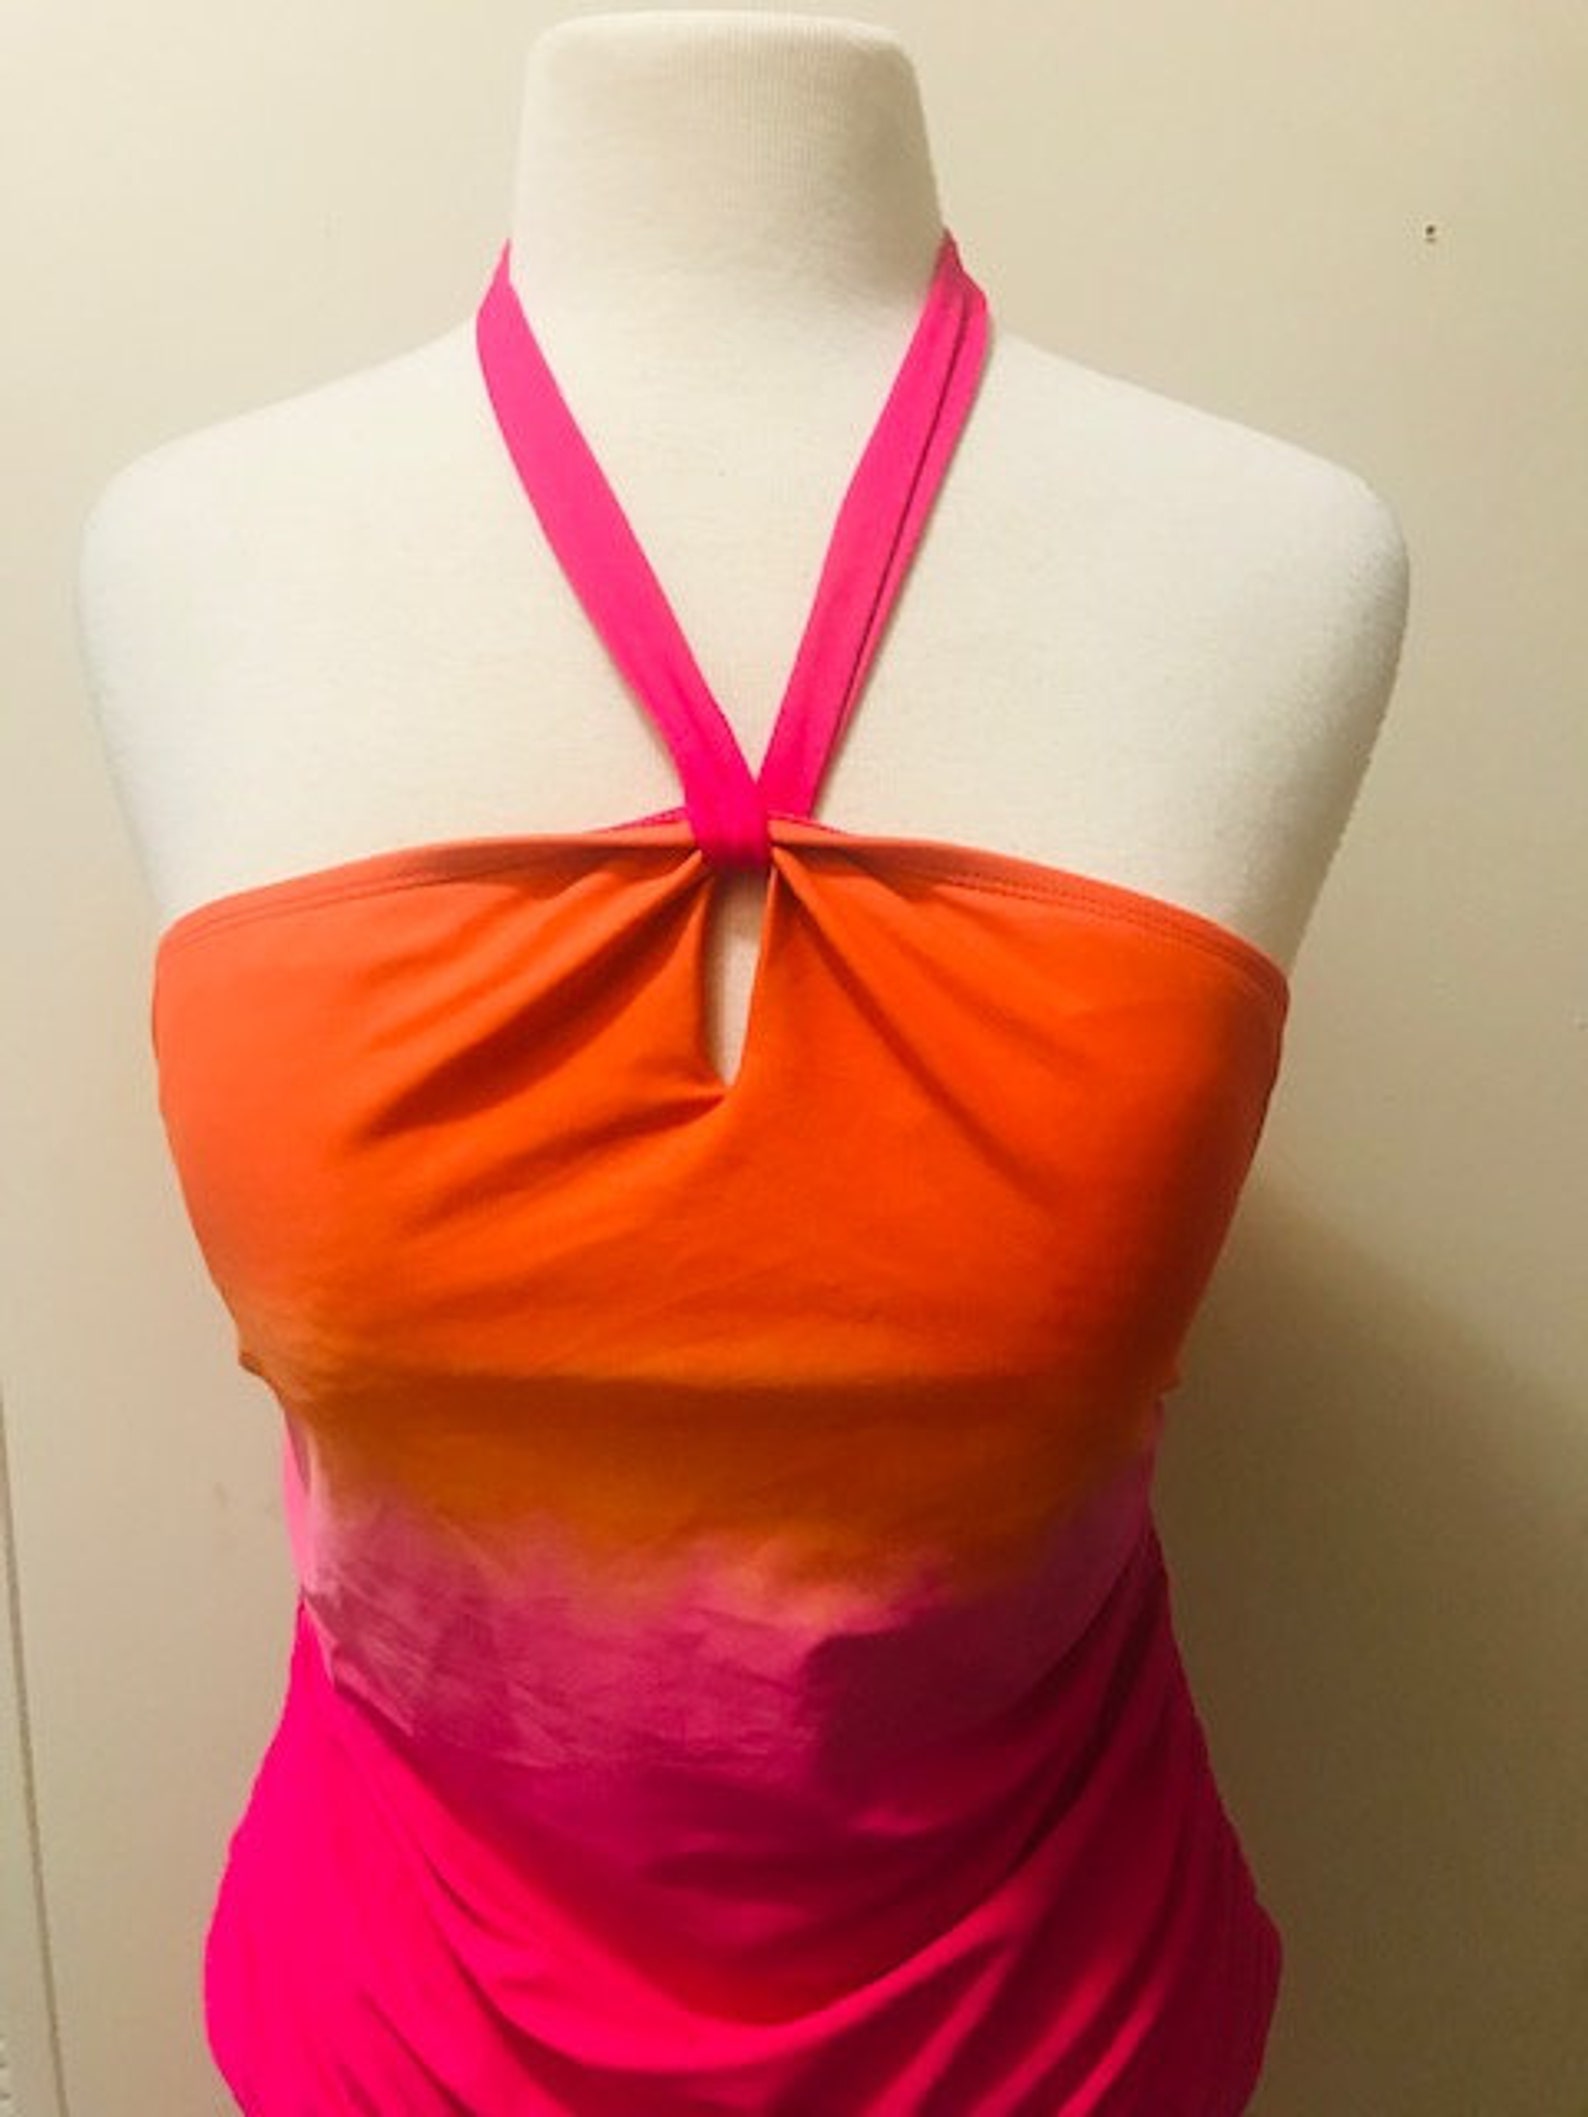 CHAPS Halter bathing Suit Top Women's Orange and Pink | Etsy